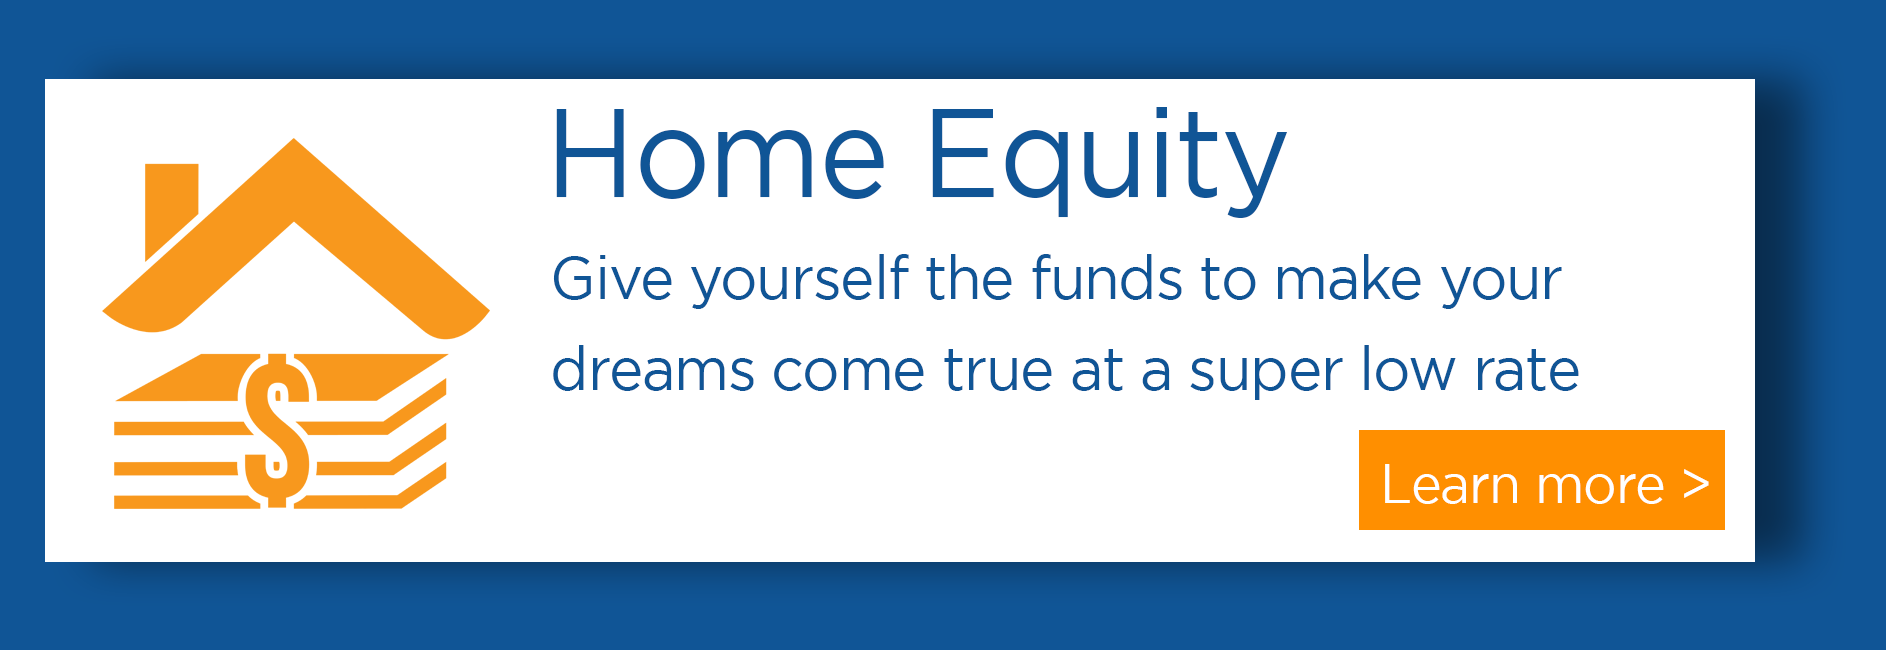 Home equity loan at Central Sunbelt